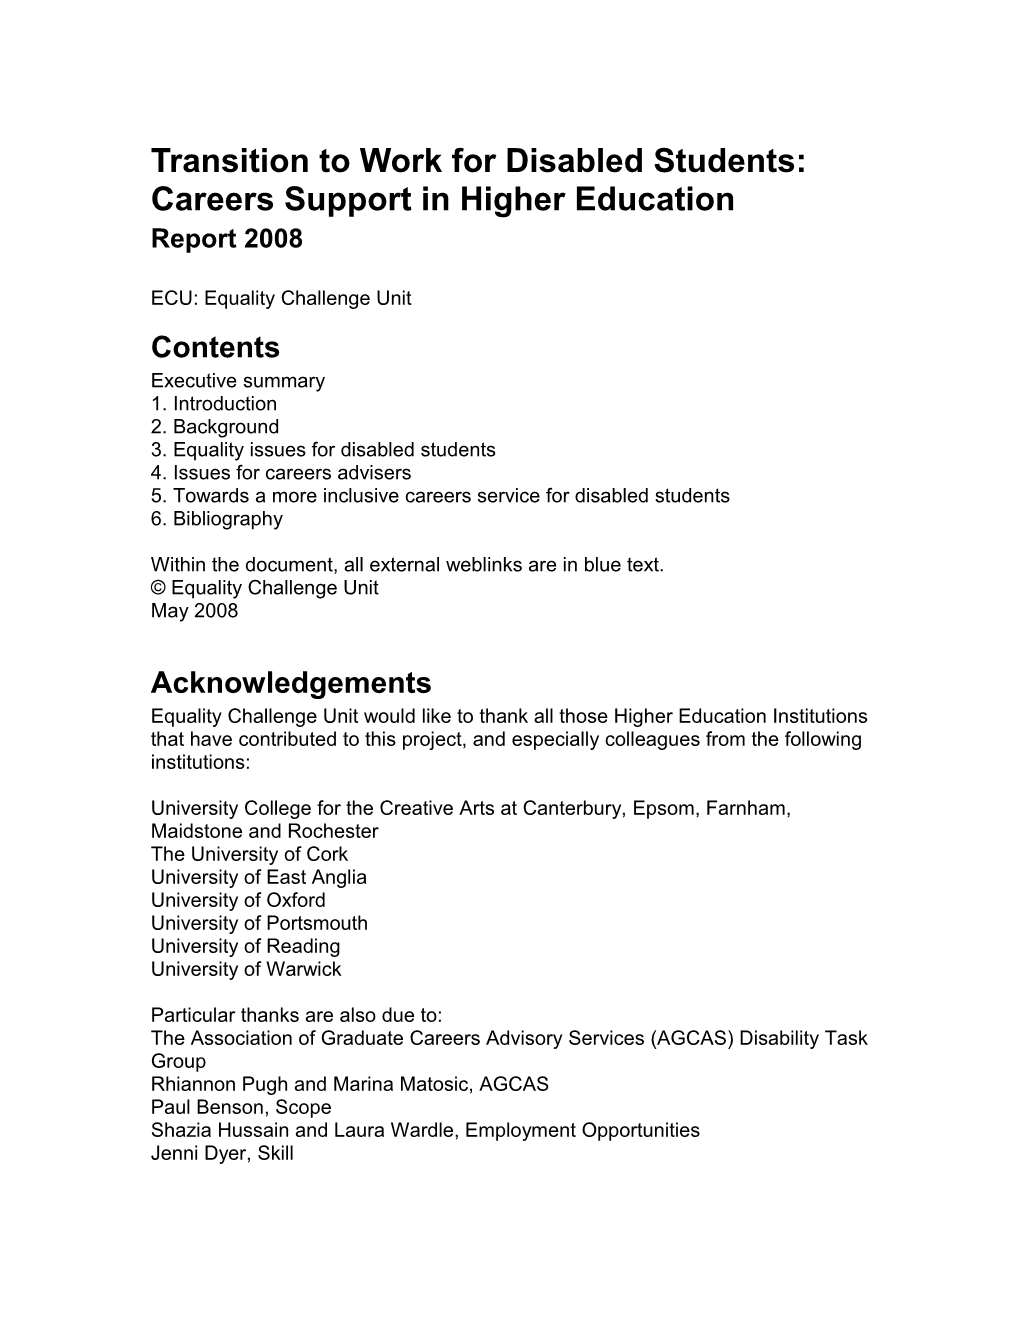 Transition to Work for Disabled Students: Careers Support in Higher Educationreport 2008